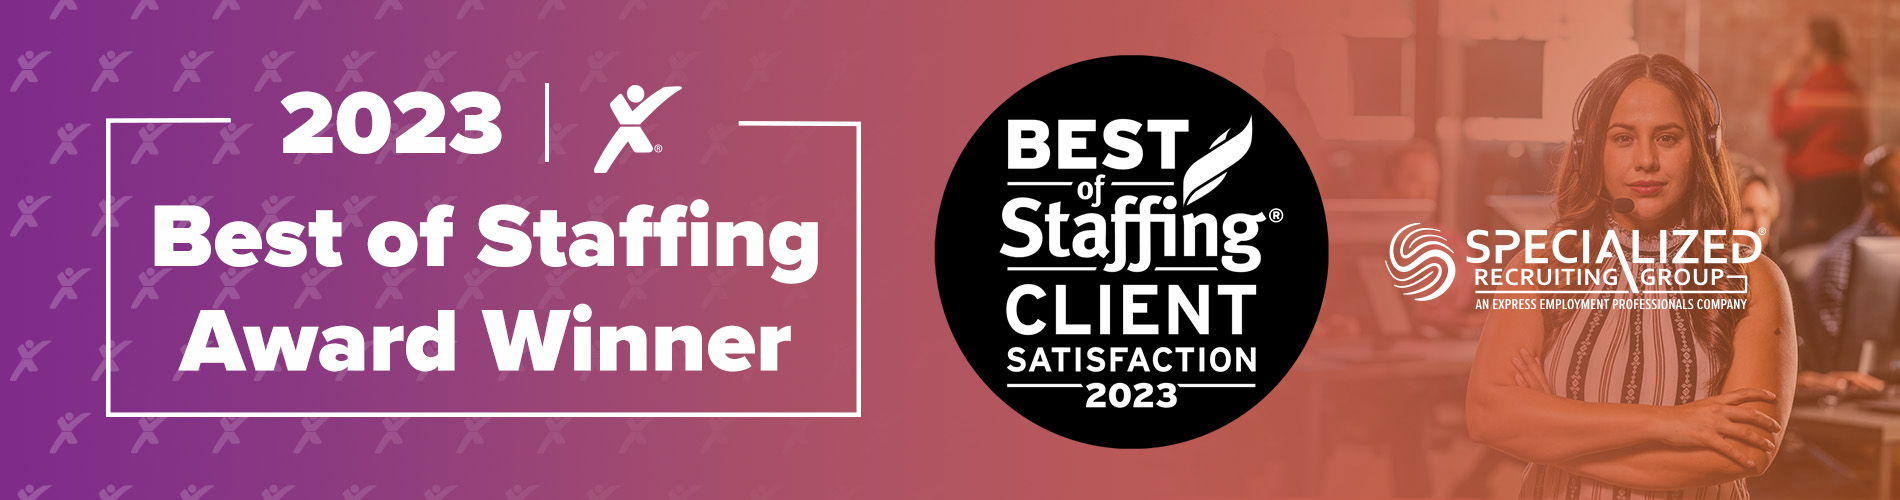 Best-of-Staffing-Client-Award-Home-Banner-SRG-2023